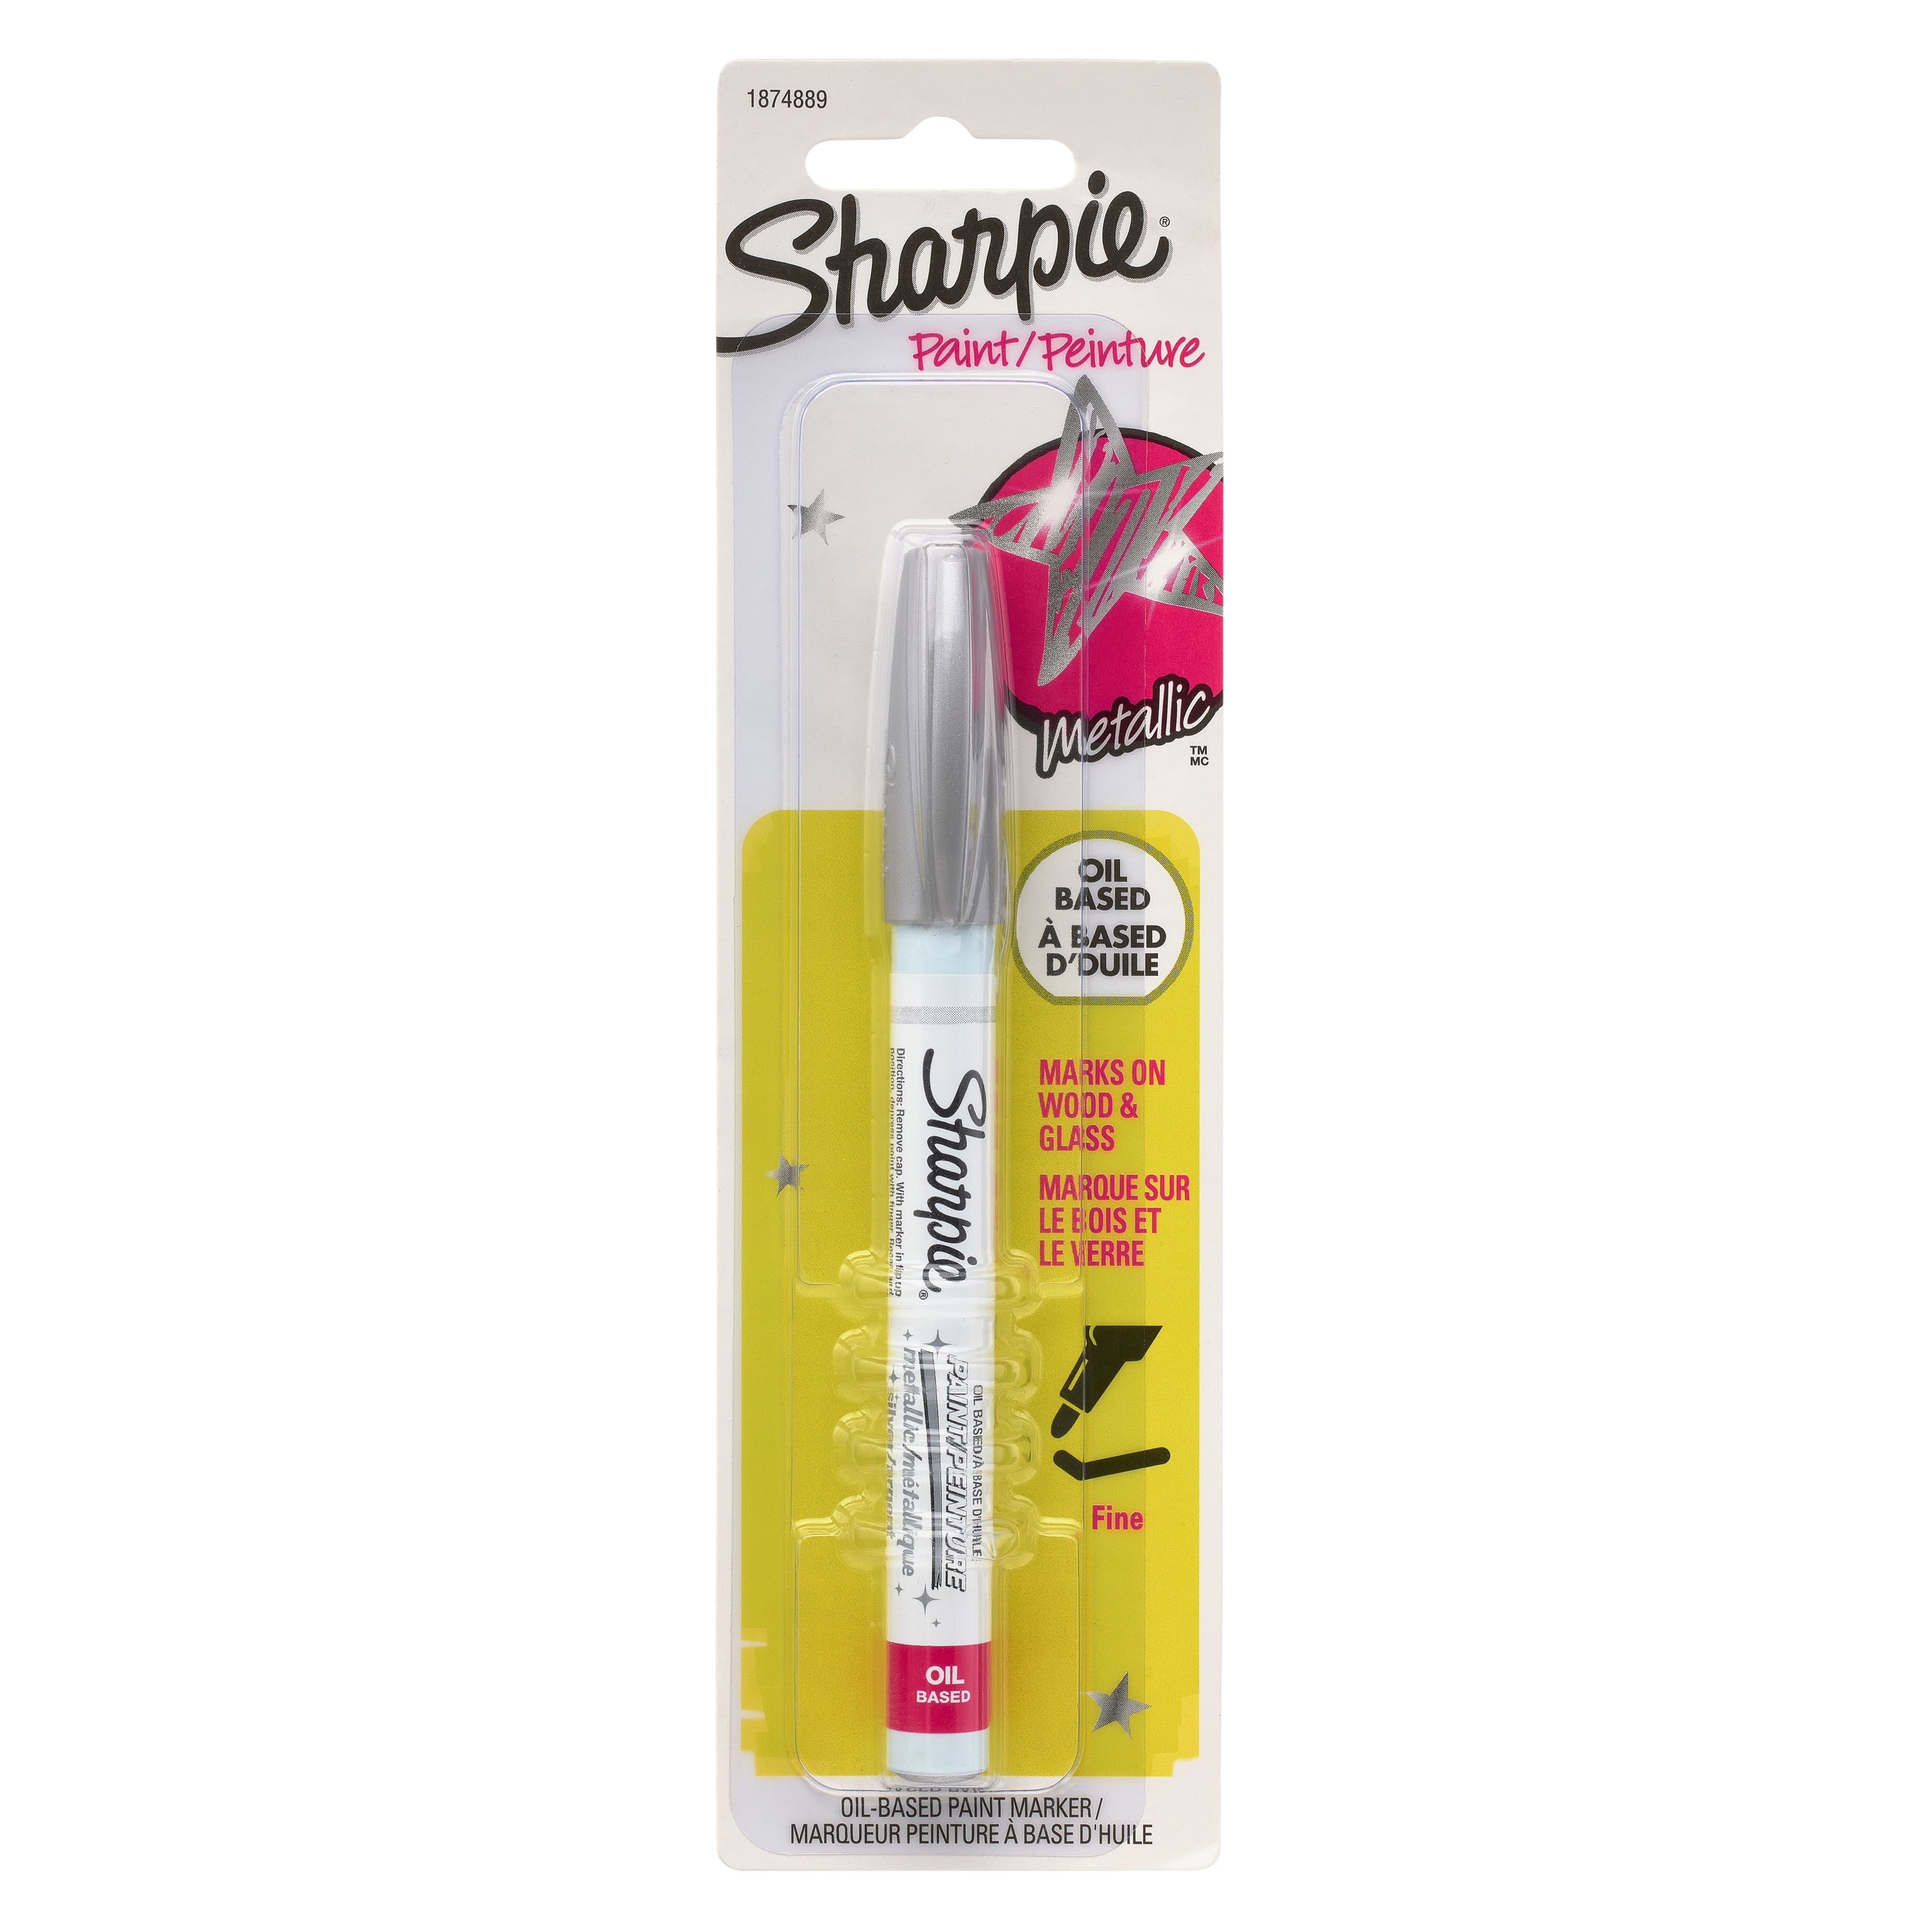  Sharpie Oil-Based Paint Marker, Fine Point, Pack of 3 (Silver)  : Arts, Crafts & Sewing